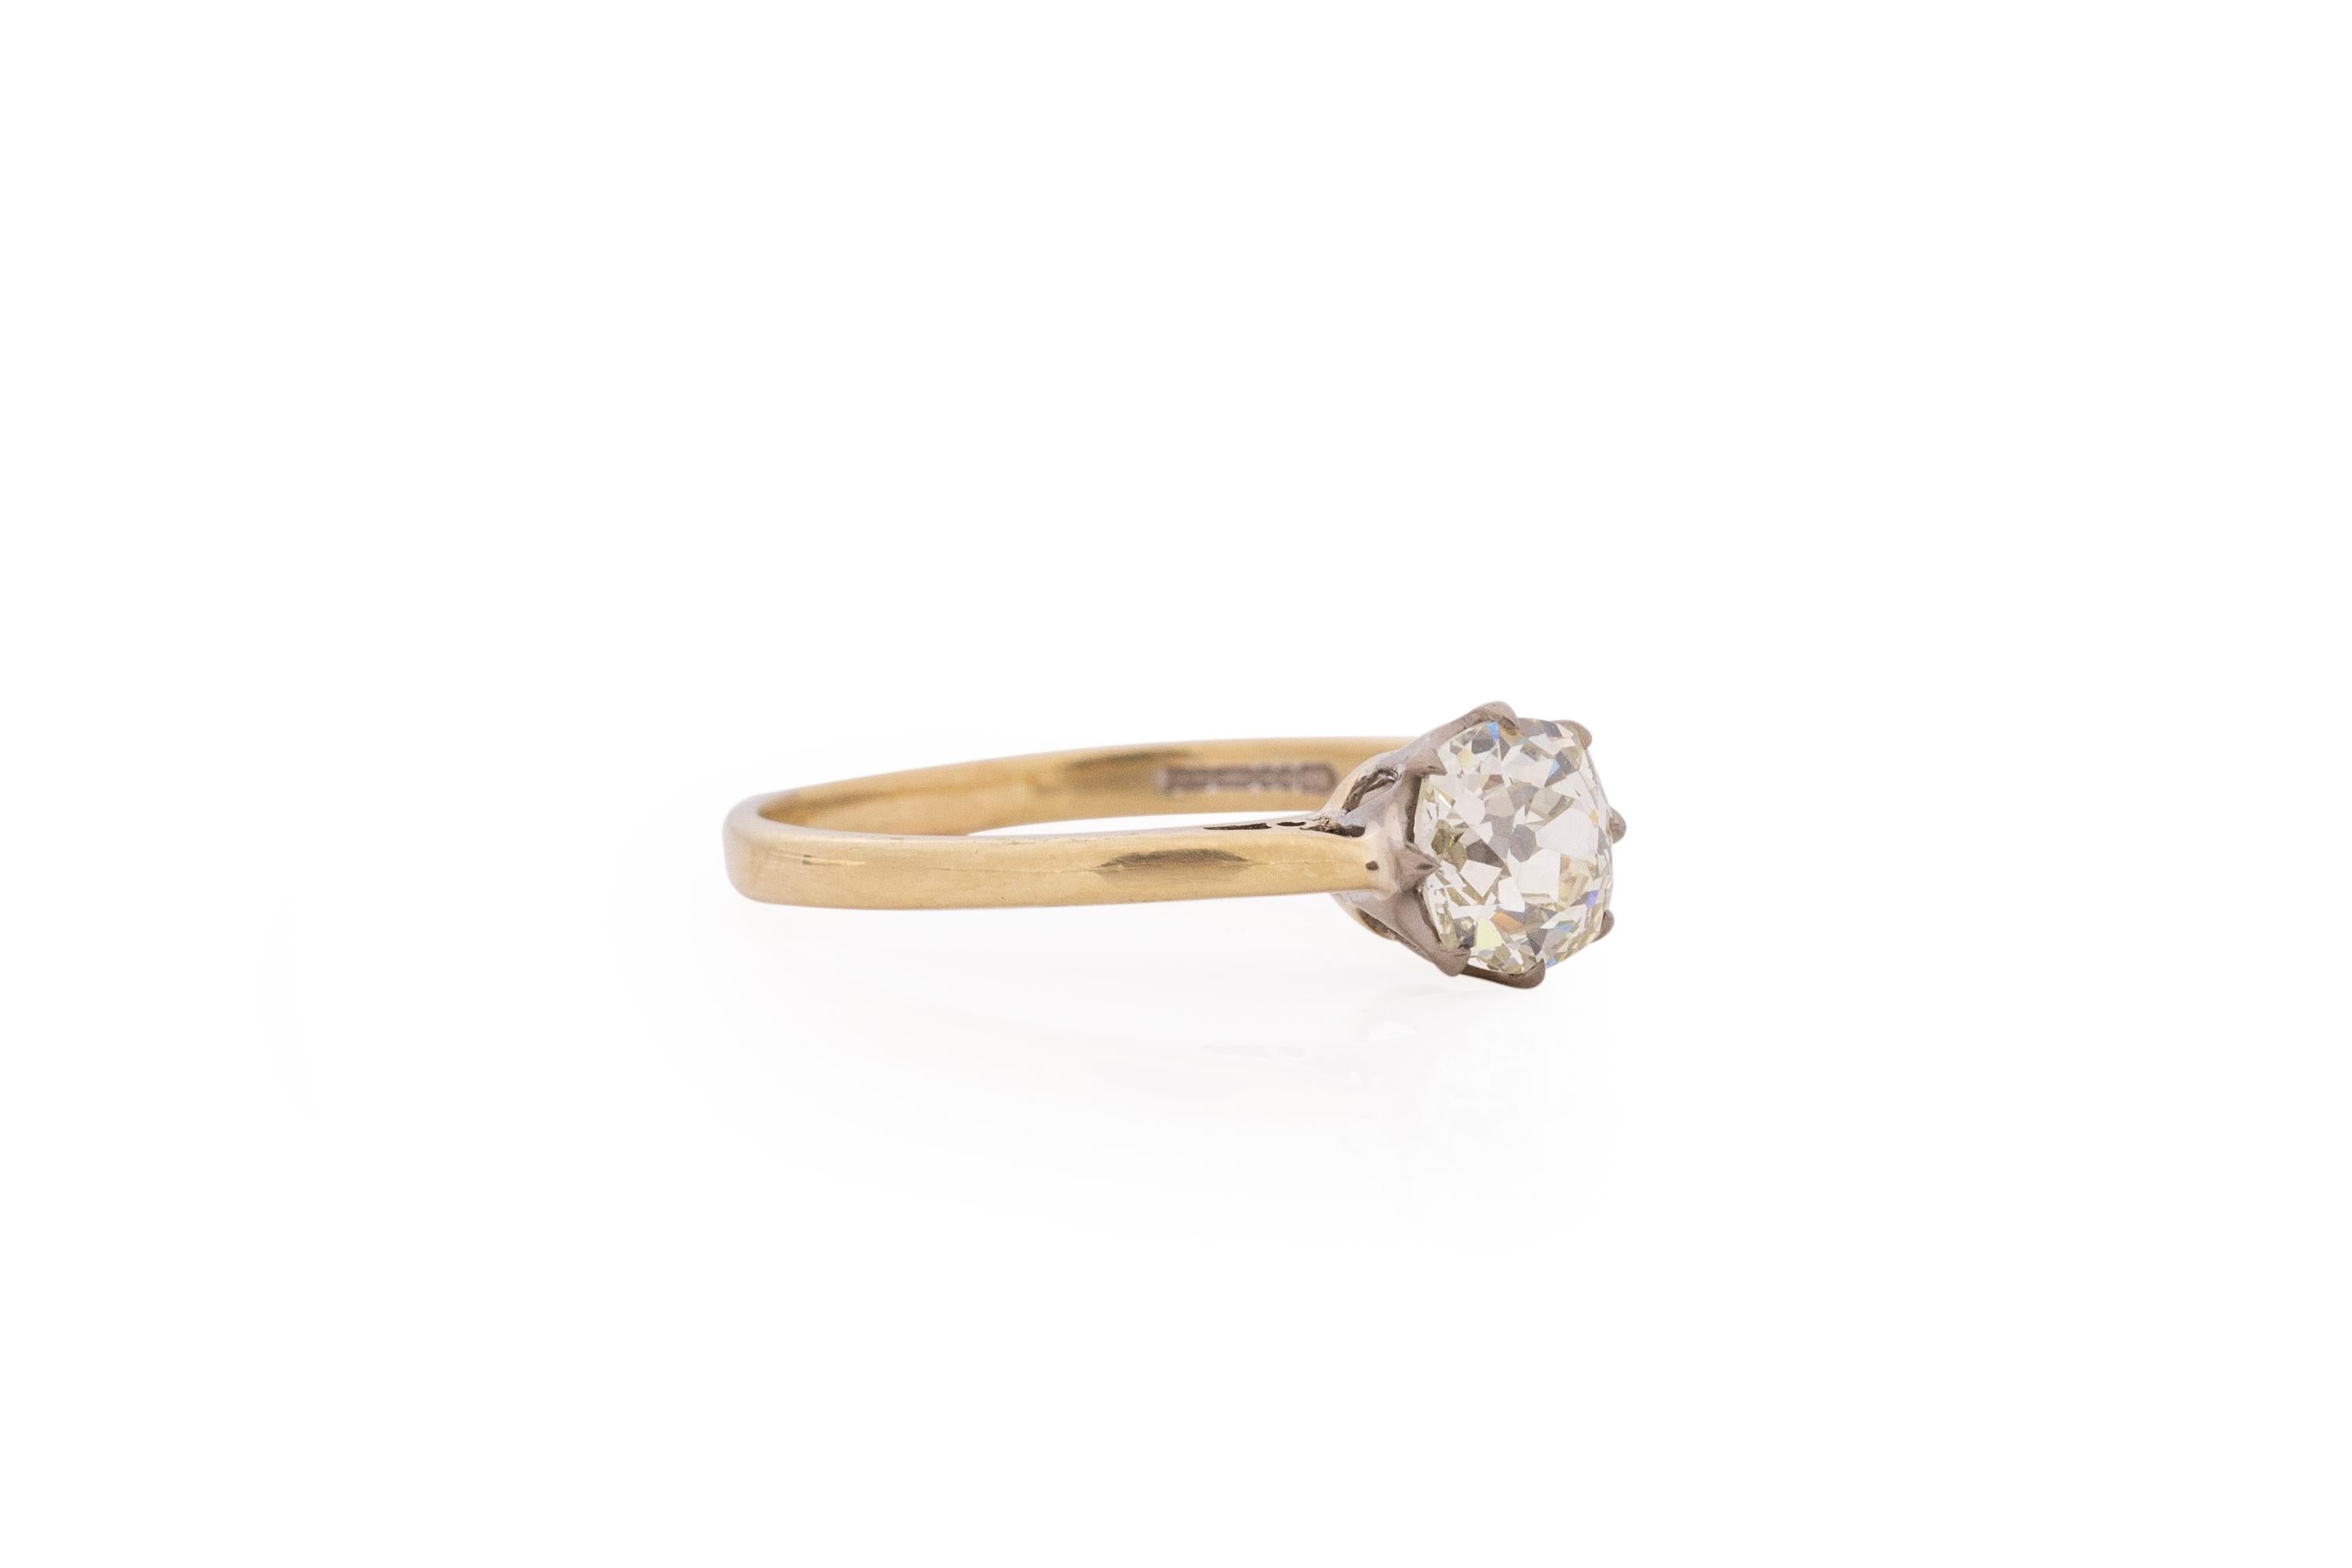 Item Details: 
Ring Size: 8.5
Metal Type: 18 Karat Yellow Gold & Platinum [Hallmarked, and Tested]
Weight: 2.6 grams

Center Diamond Details:
GIA REPORT #: 2215394250
Weight: 1.01
Cut: (Antique Cushion) Old Mine Brilliant
Color: Light Yellow